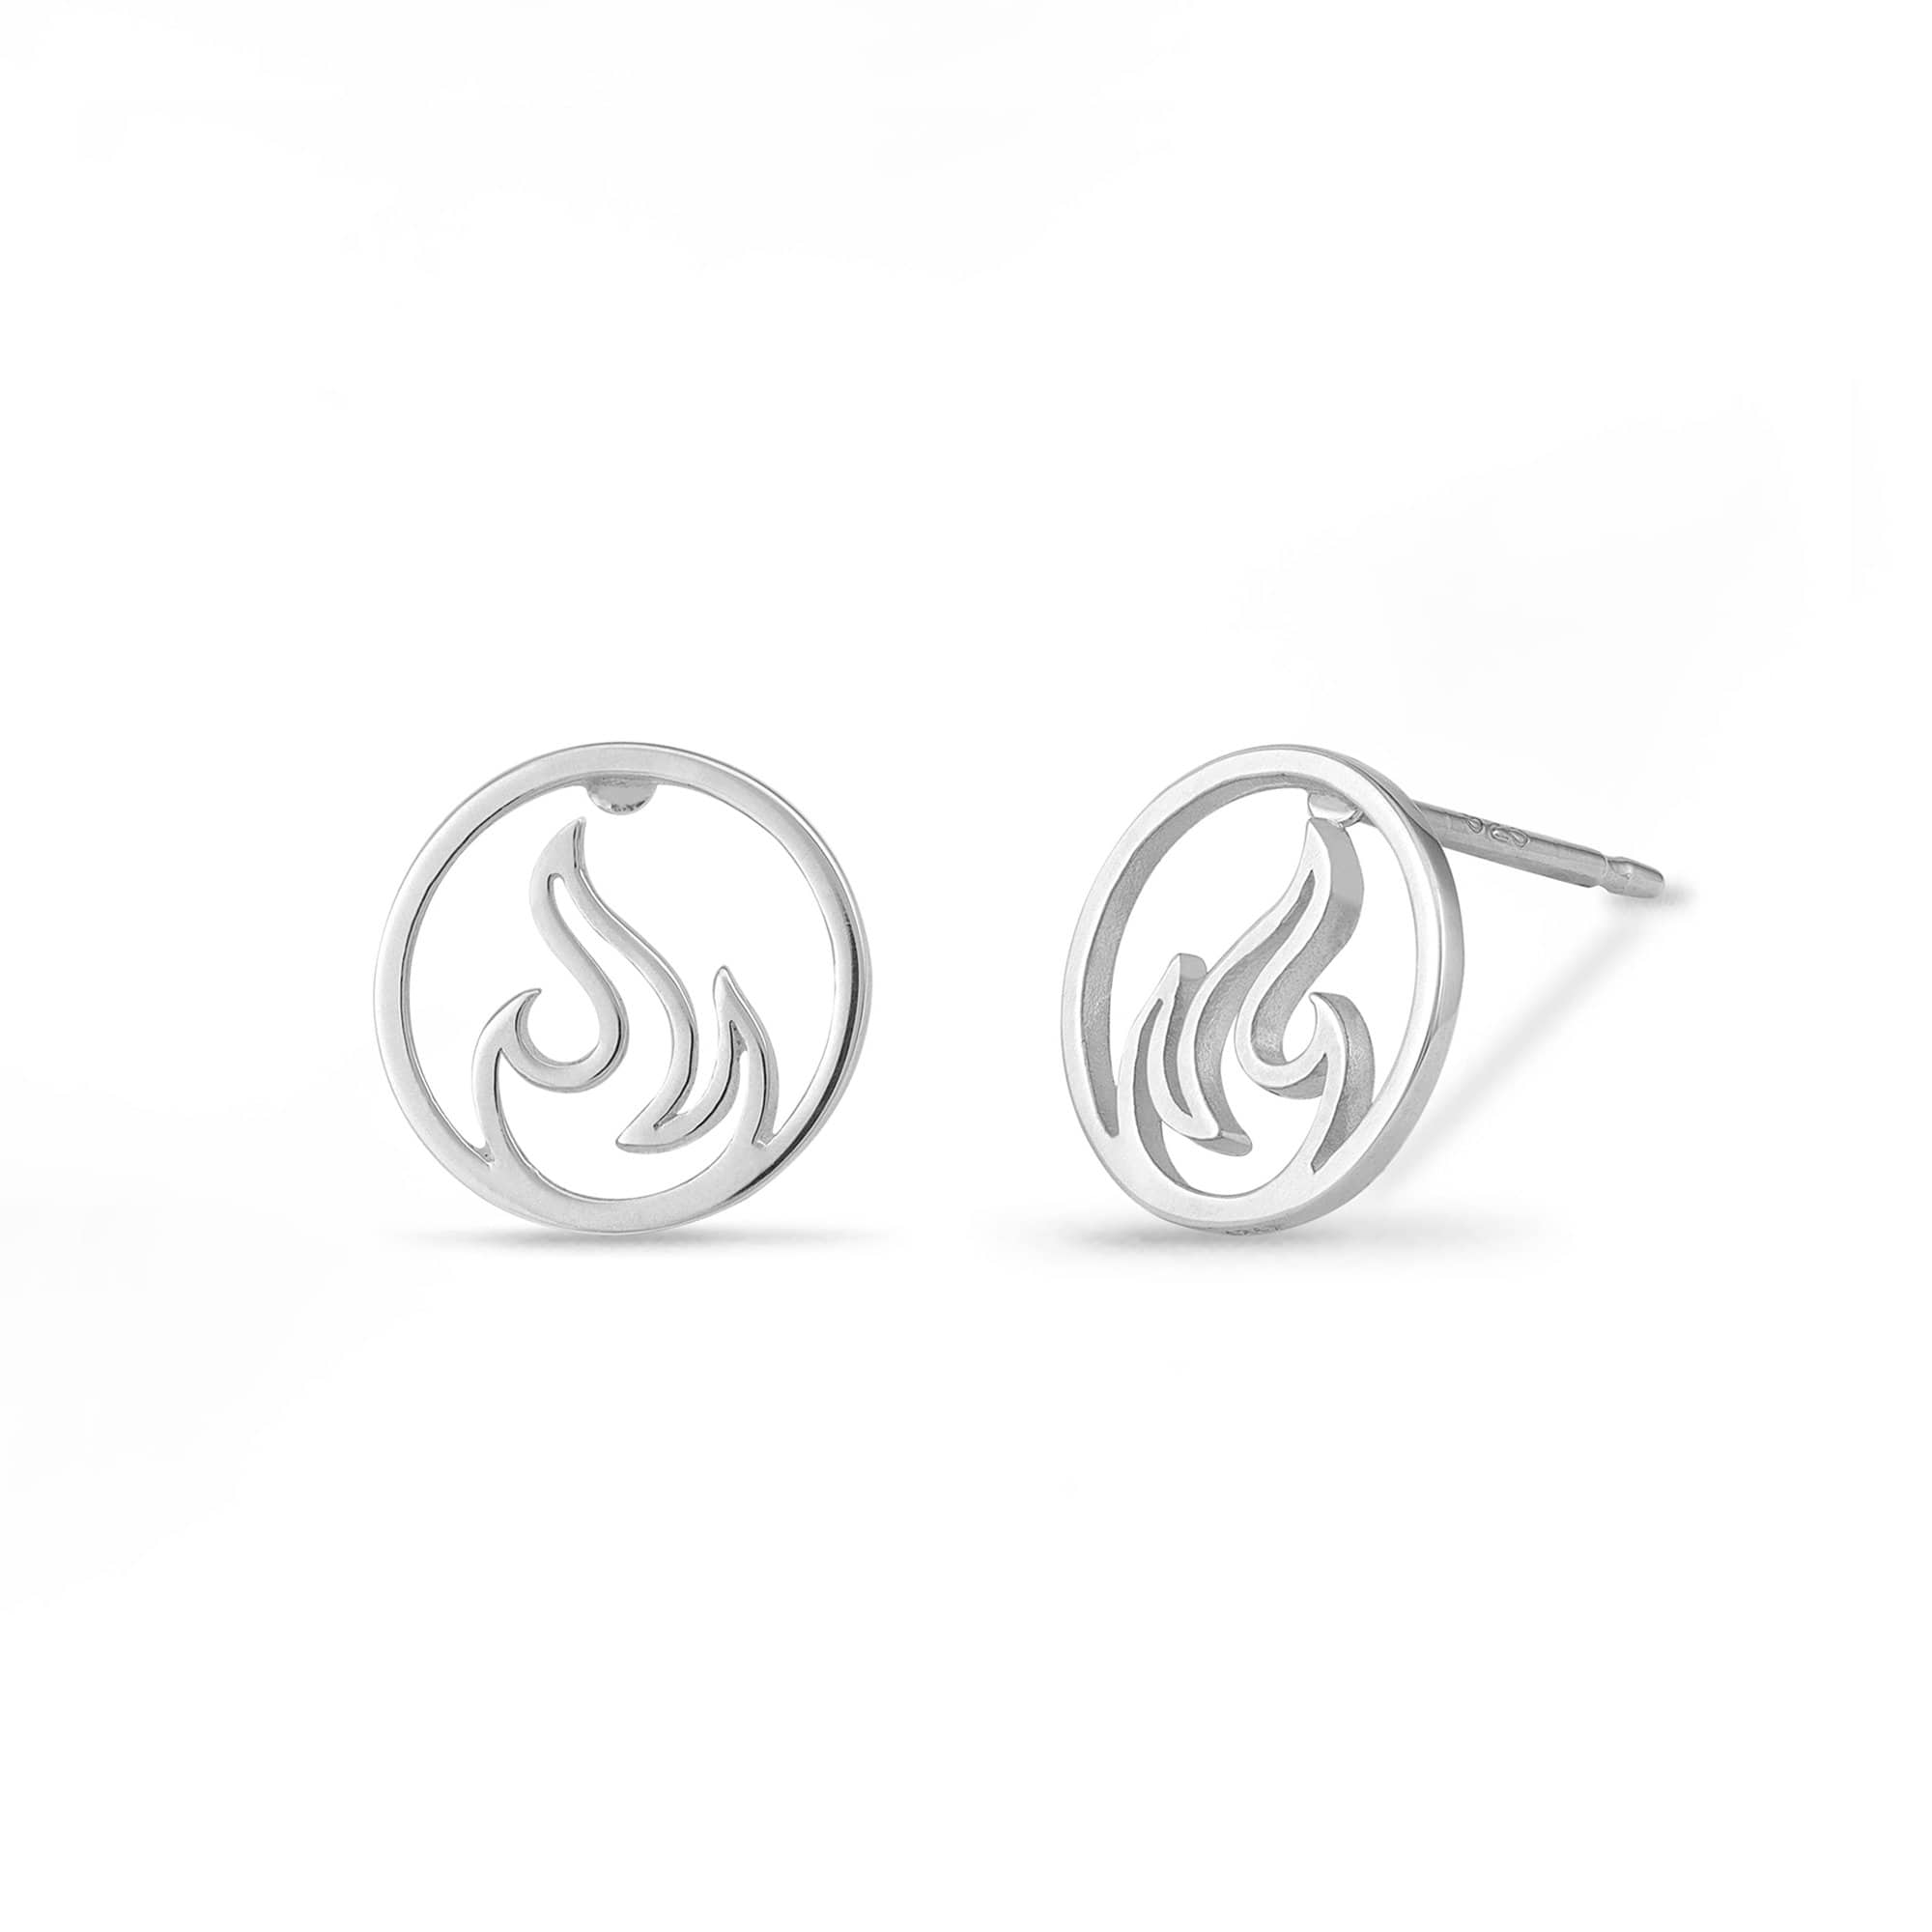 Boma Jewelry Earrings Round Fire Flame Studs